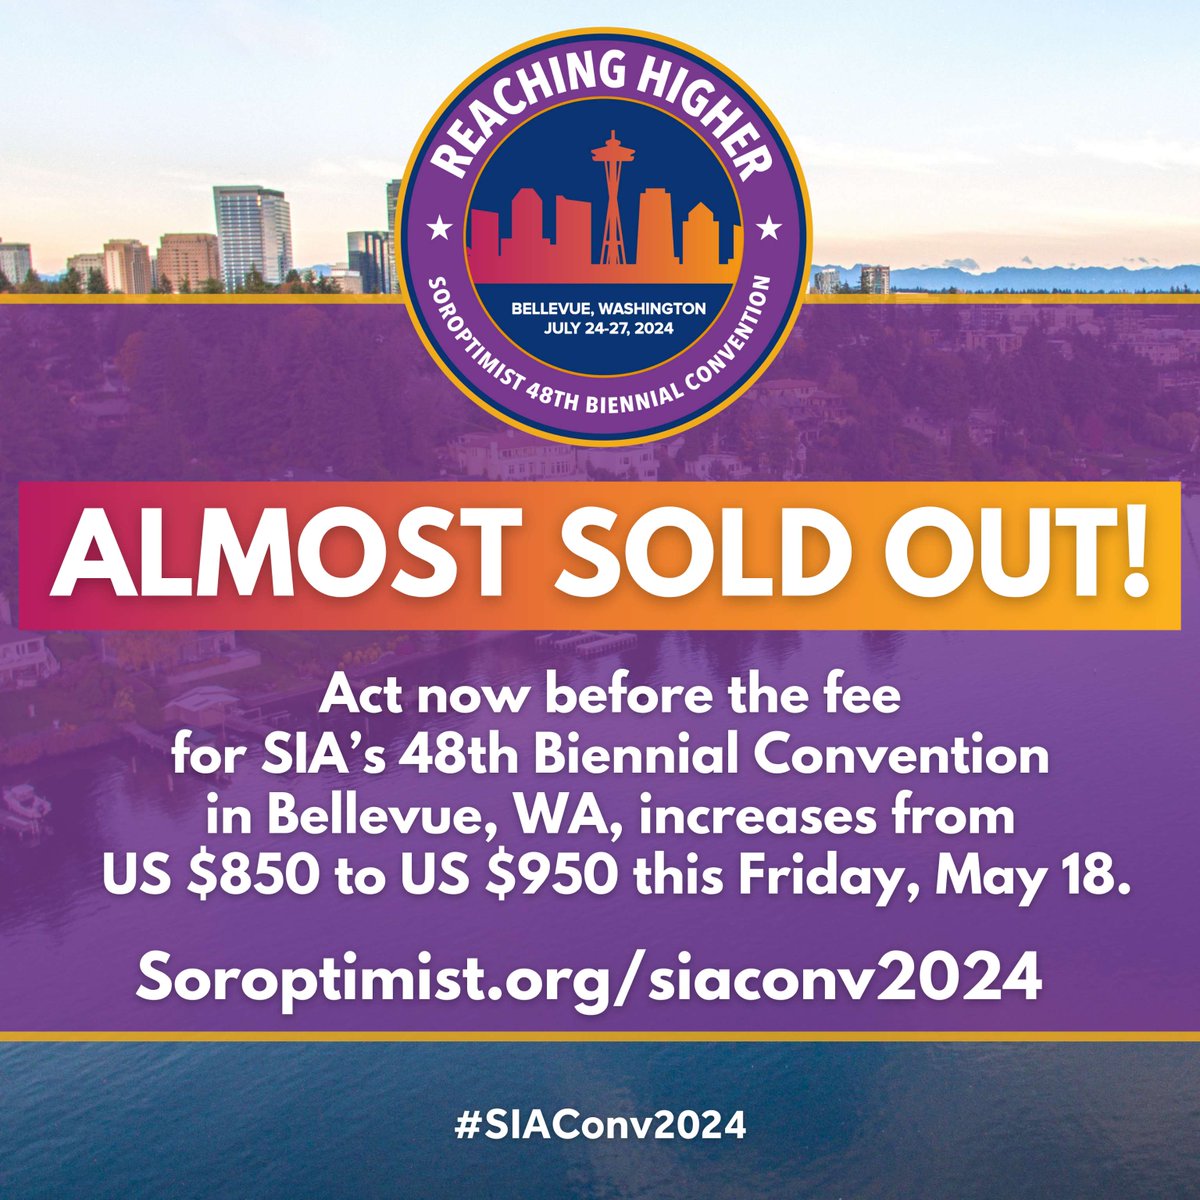 🚨 Space is limited for SIA's 48th Biennial Convention! Act now before registration increases from US $850 to US $950 this Friday, May 18. Register now: soroptimist.org/siaconv2024 #SIAConv2024